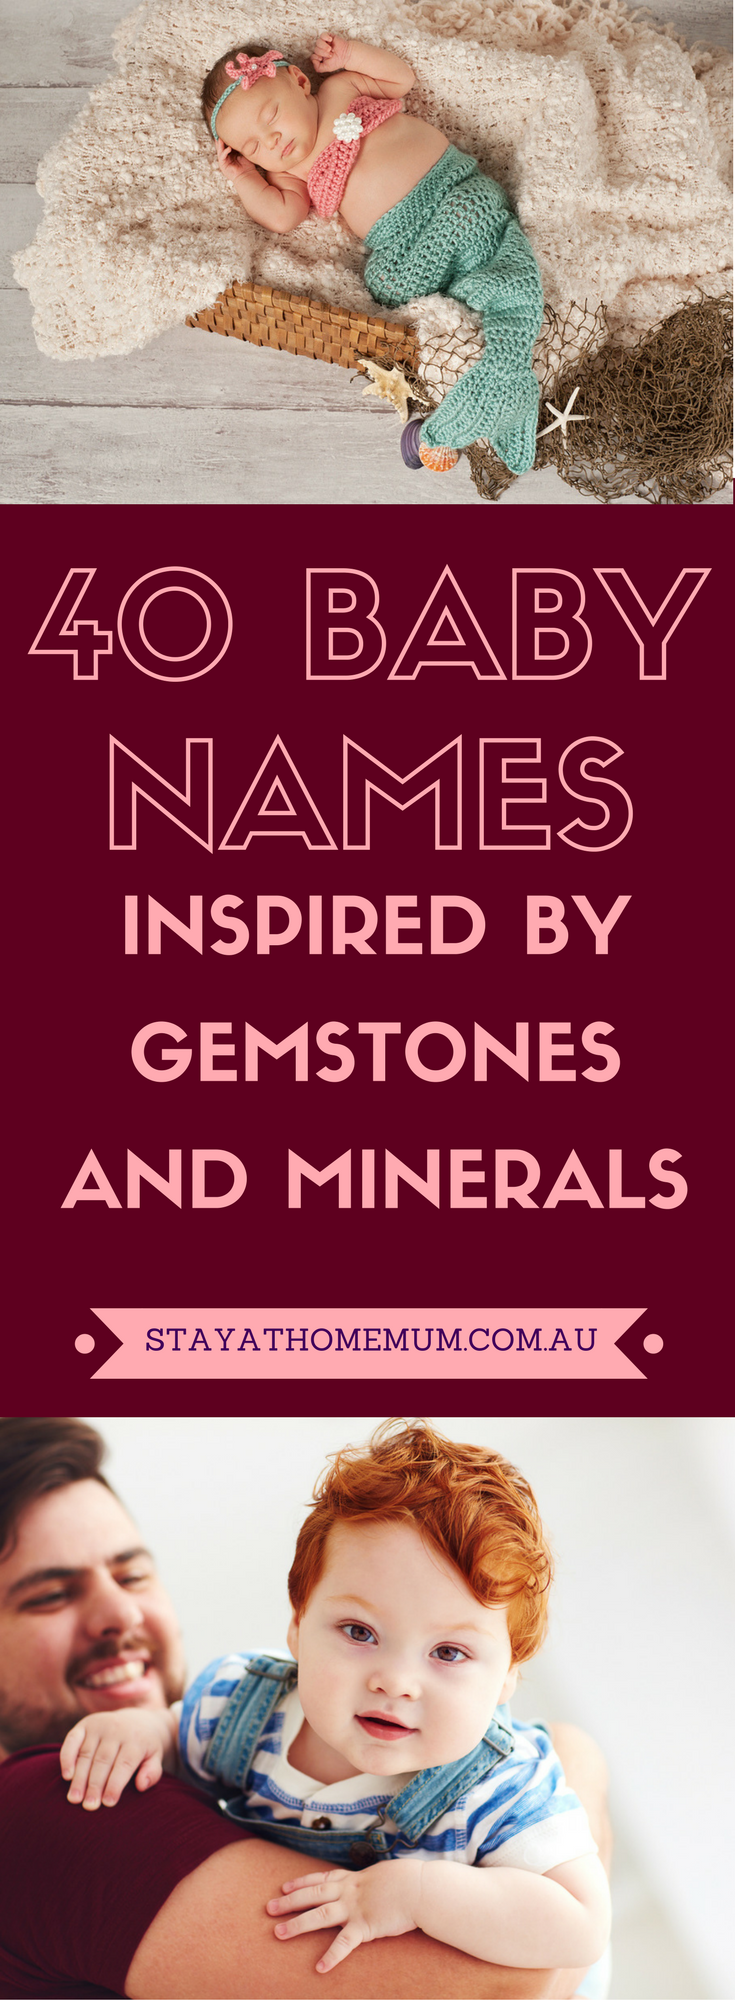 40 Baby Names Inspired By Gemstones And Minerals (1)